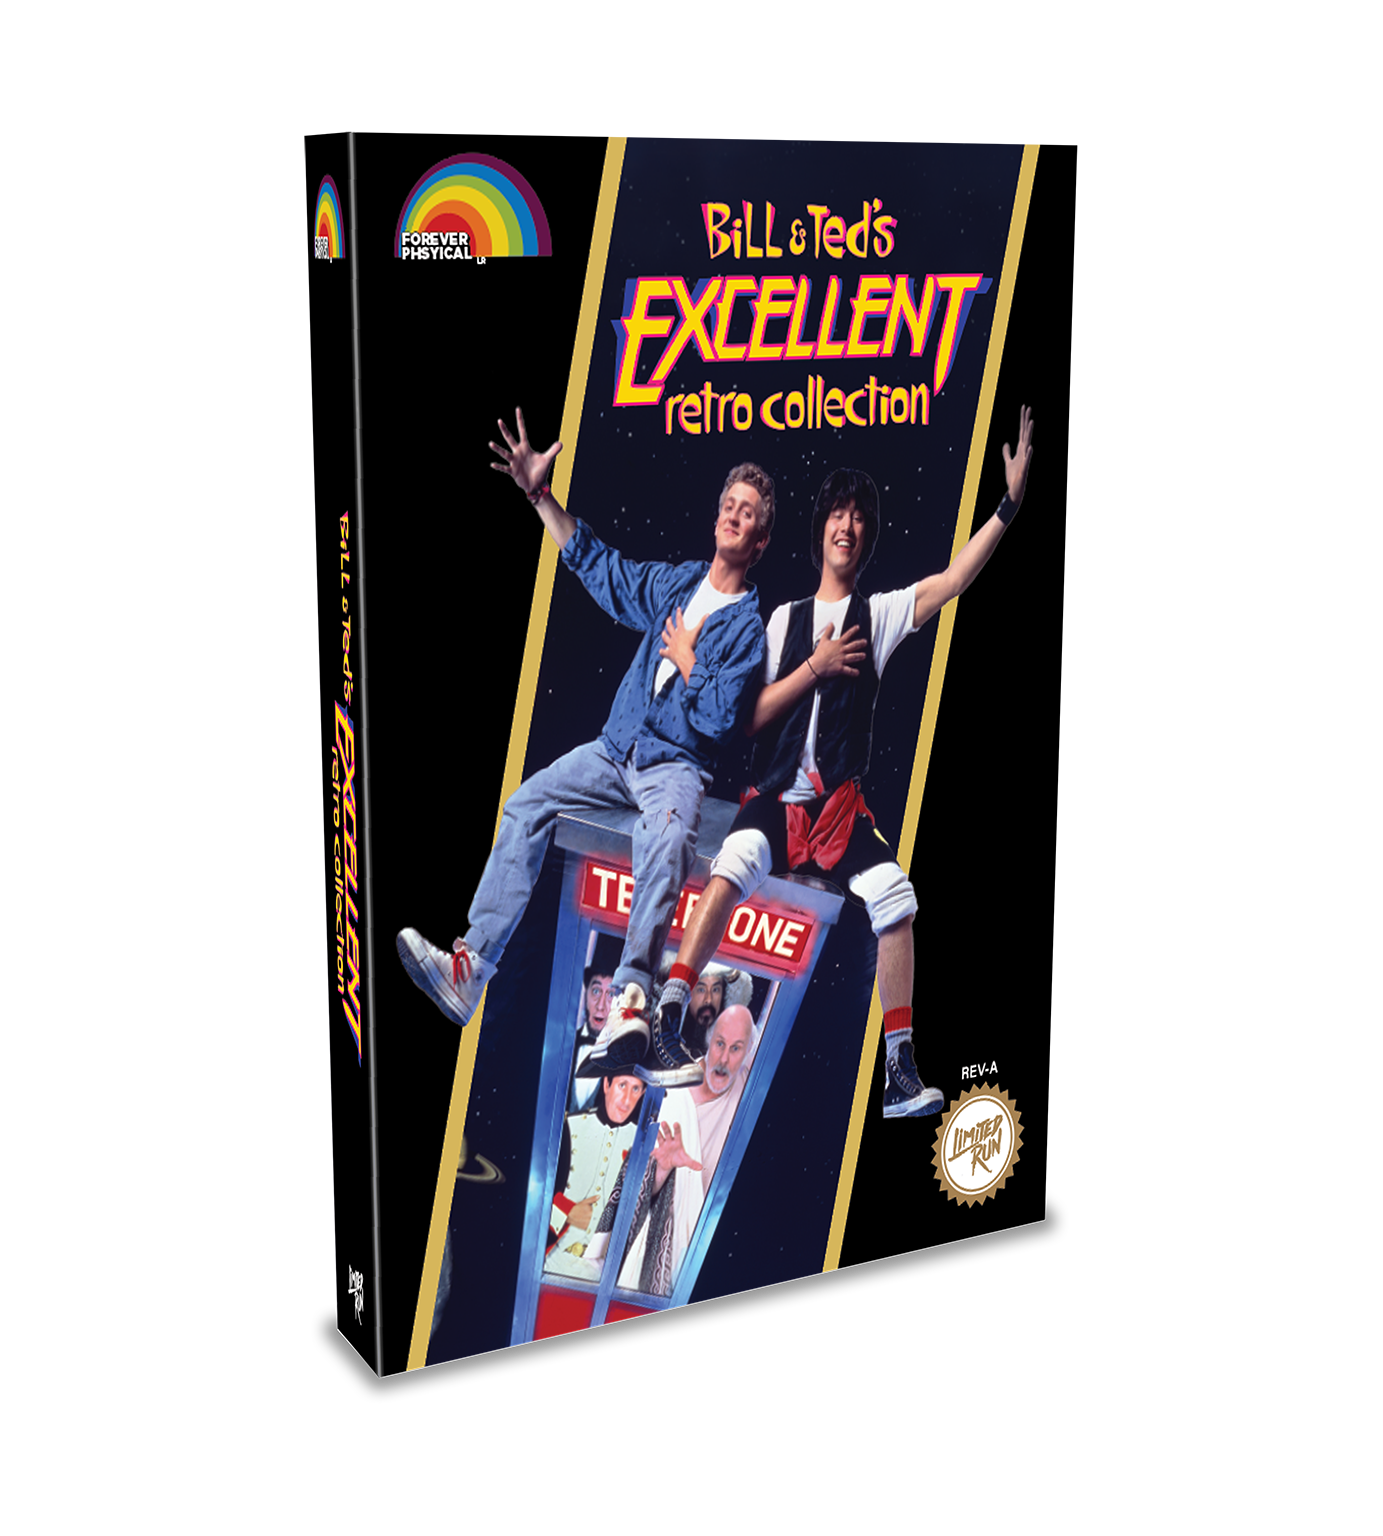 Bill&Ted's Excellent Retro Collection - Collectors Edition (Limited Run) (Import) - Videospill og konsoller